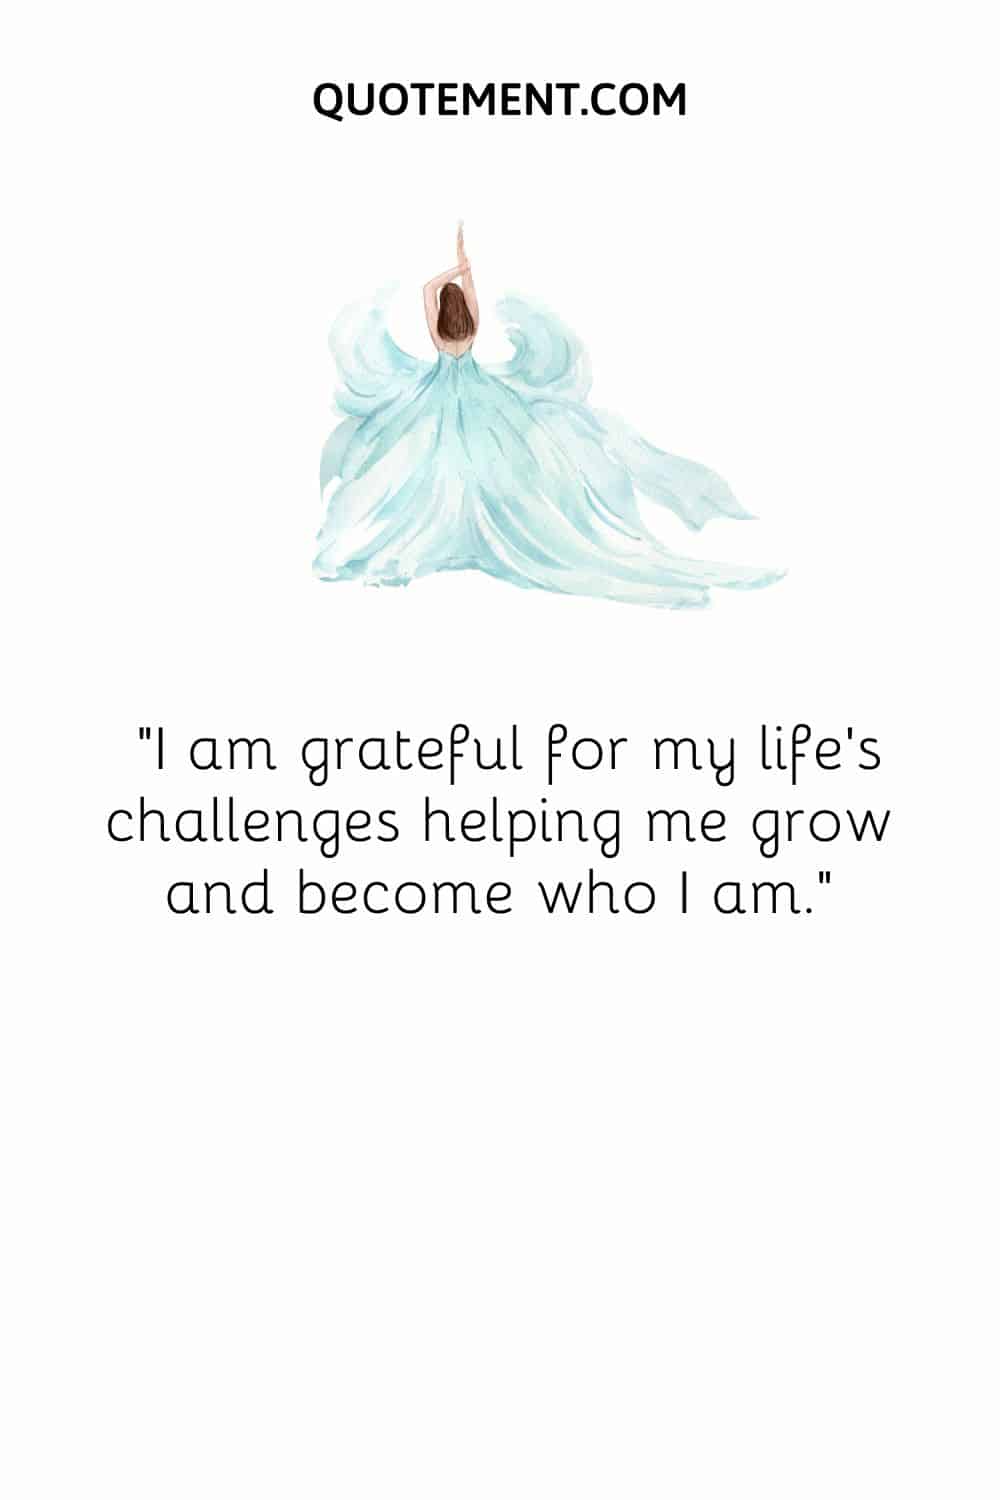 I am grateful for my life's challenges helping me grow and become who I am